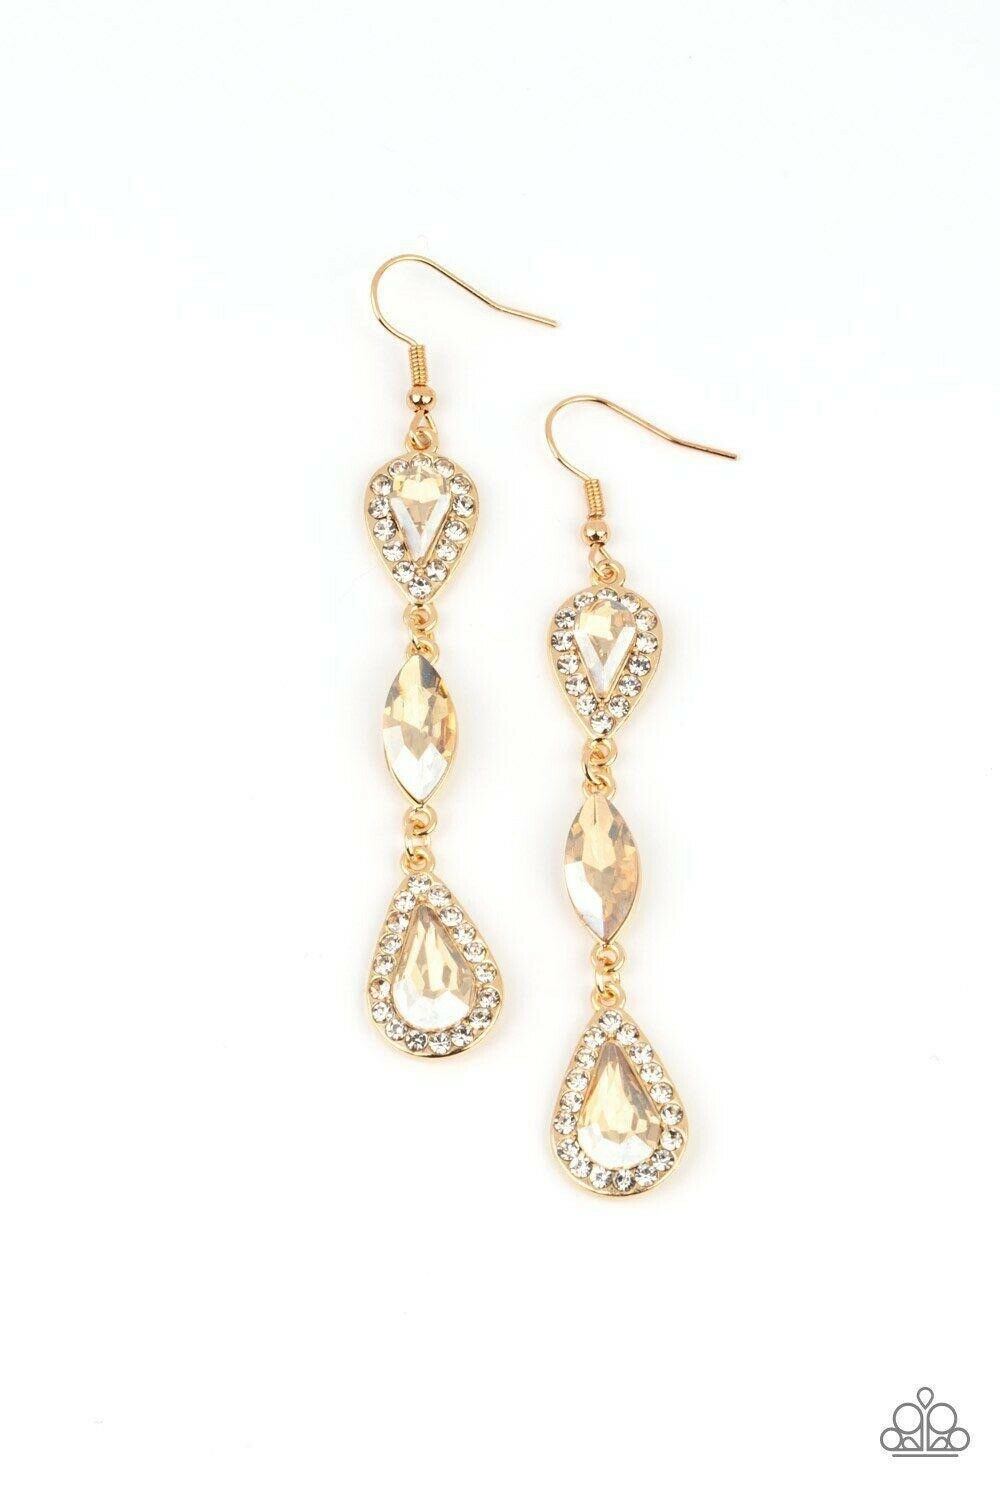 Test of TIMELESS - Gold Earrings Paparazzi Jewelry Accessories 3264